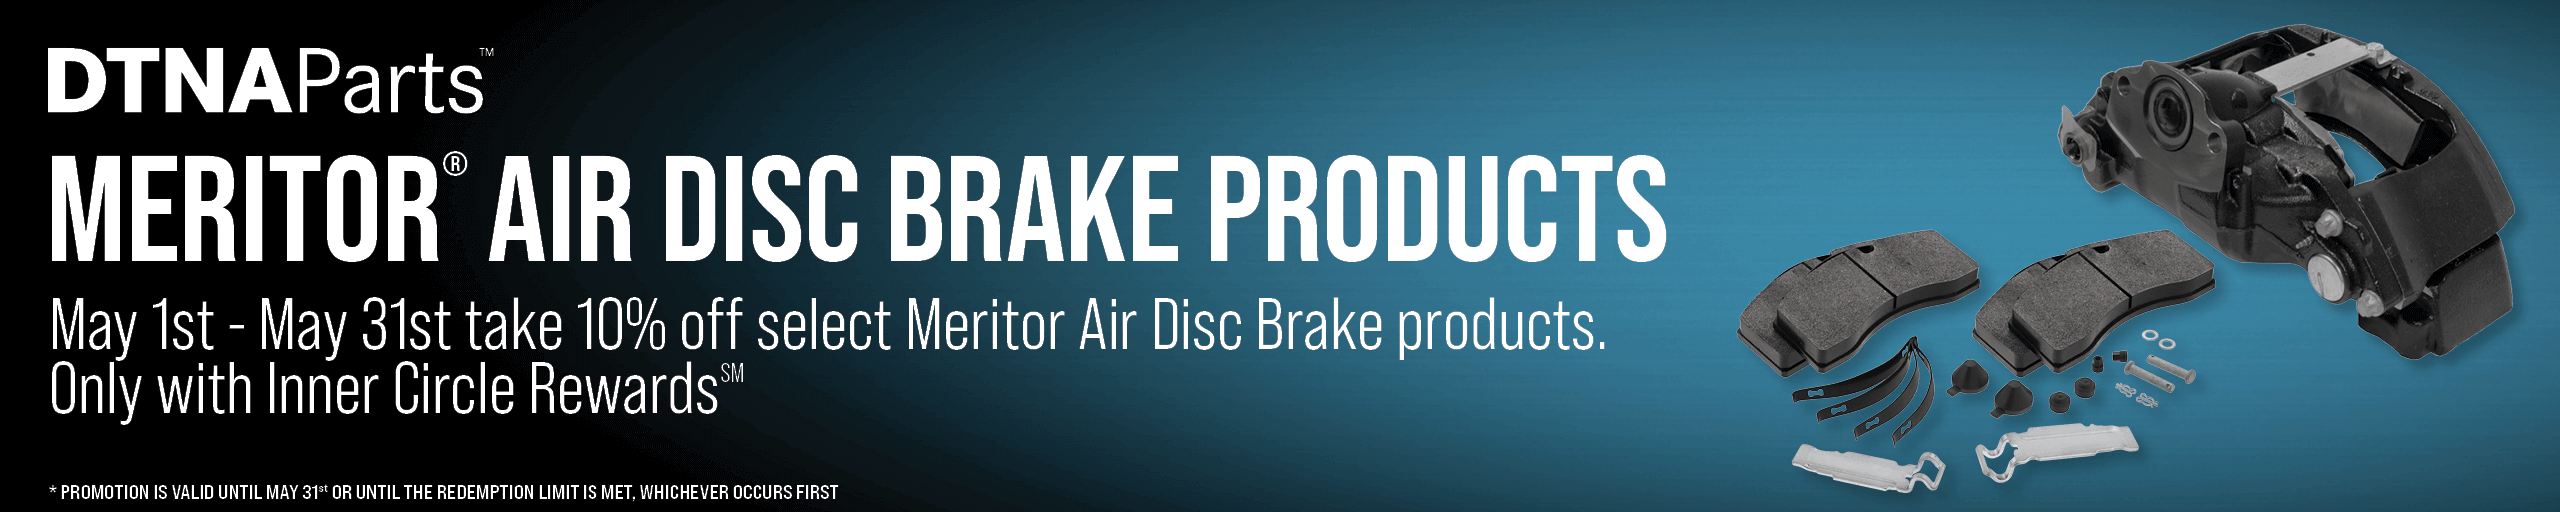 Take 10% off select Meritor Air Disc Brake Products May 1st - 31st. Only Inner Circle Rewards.